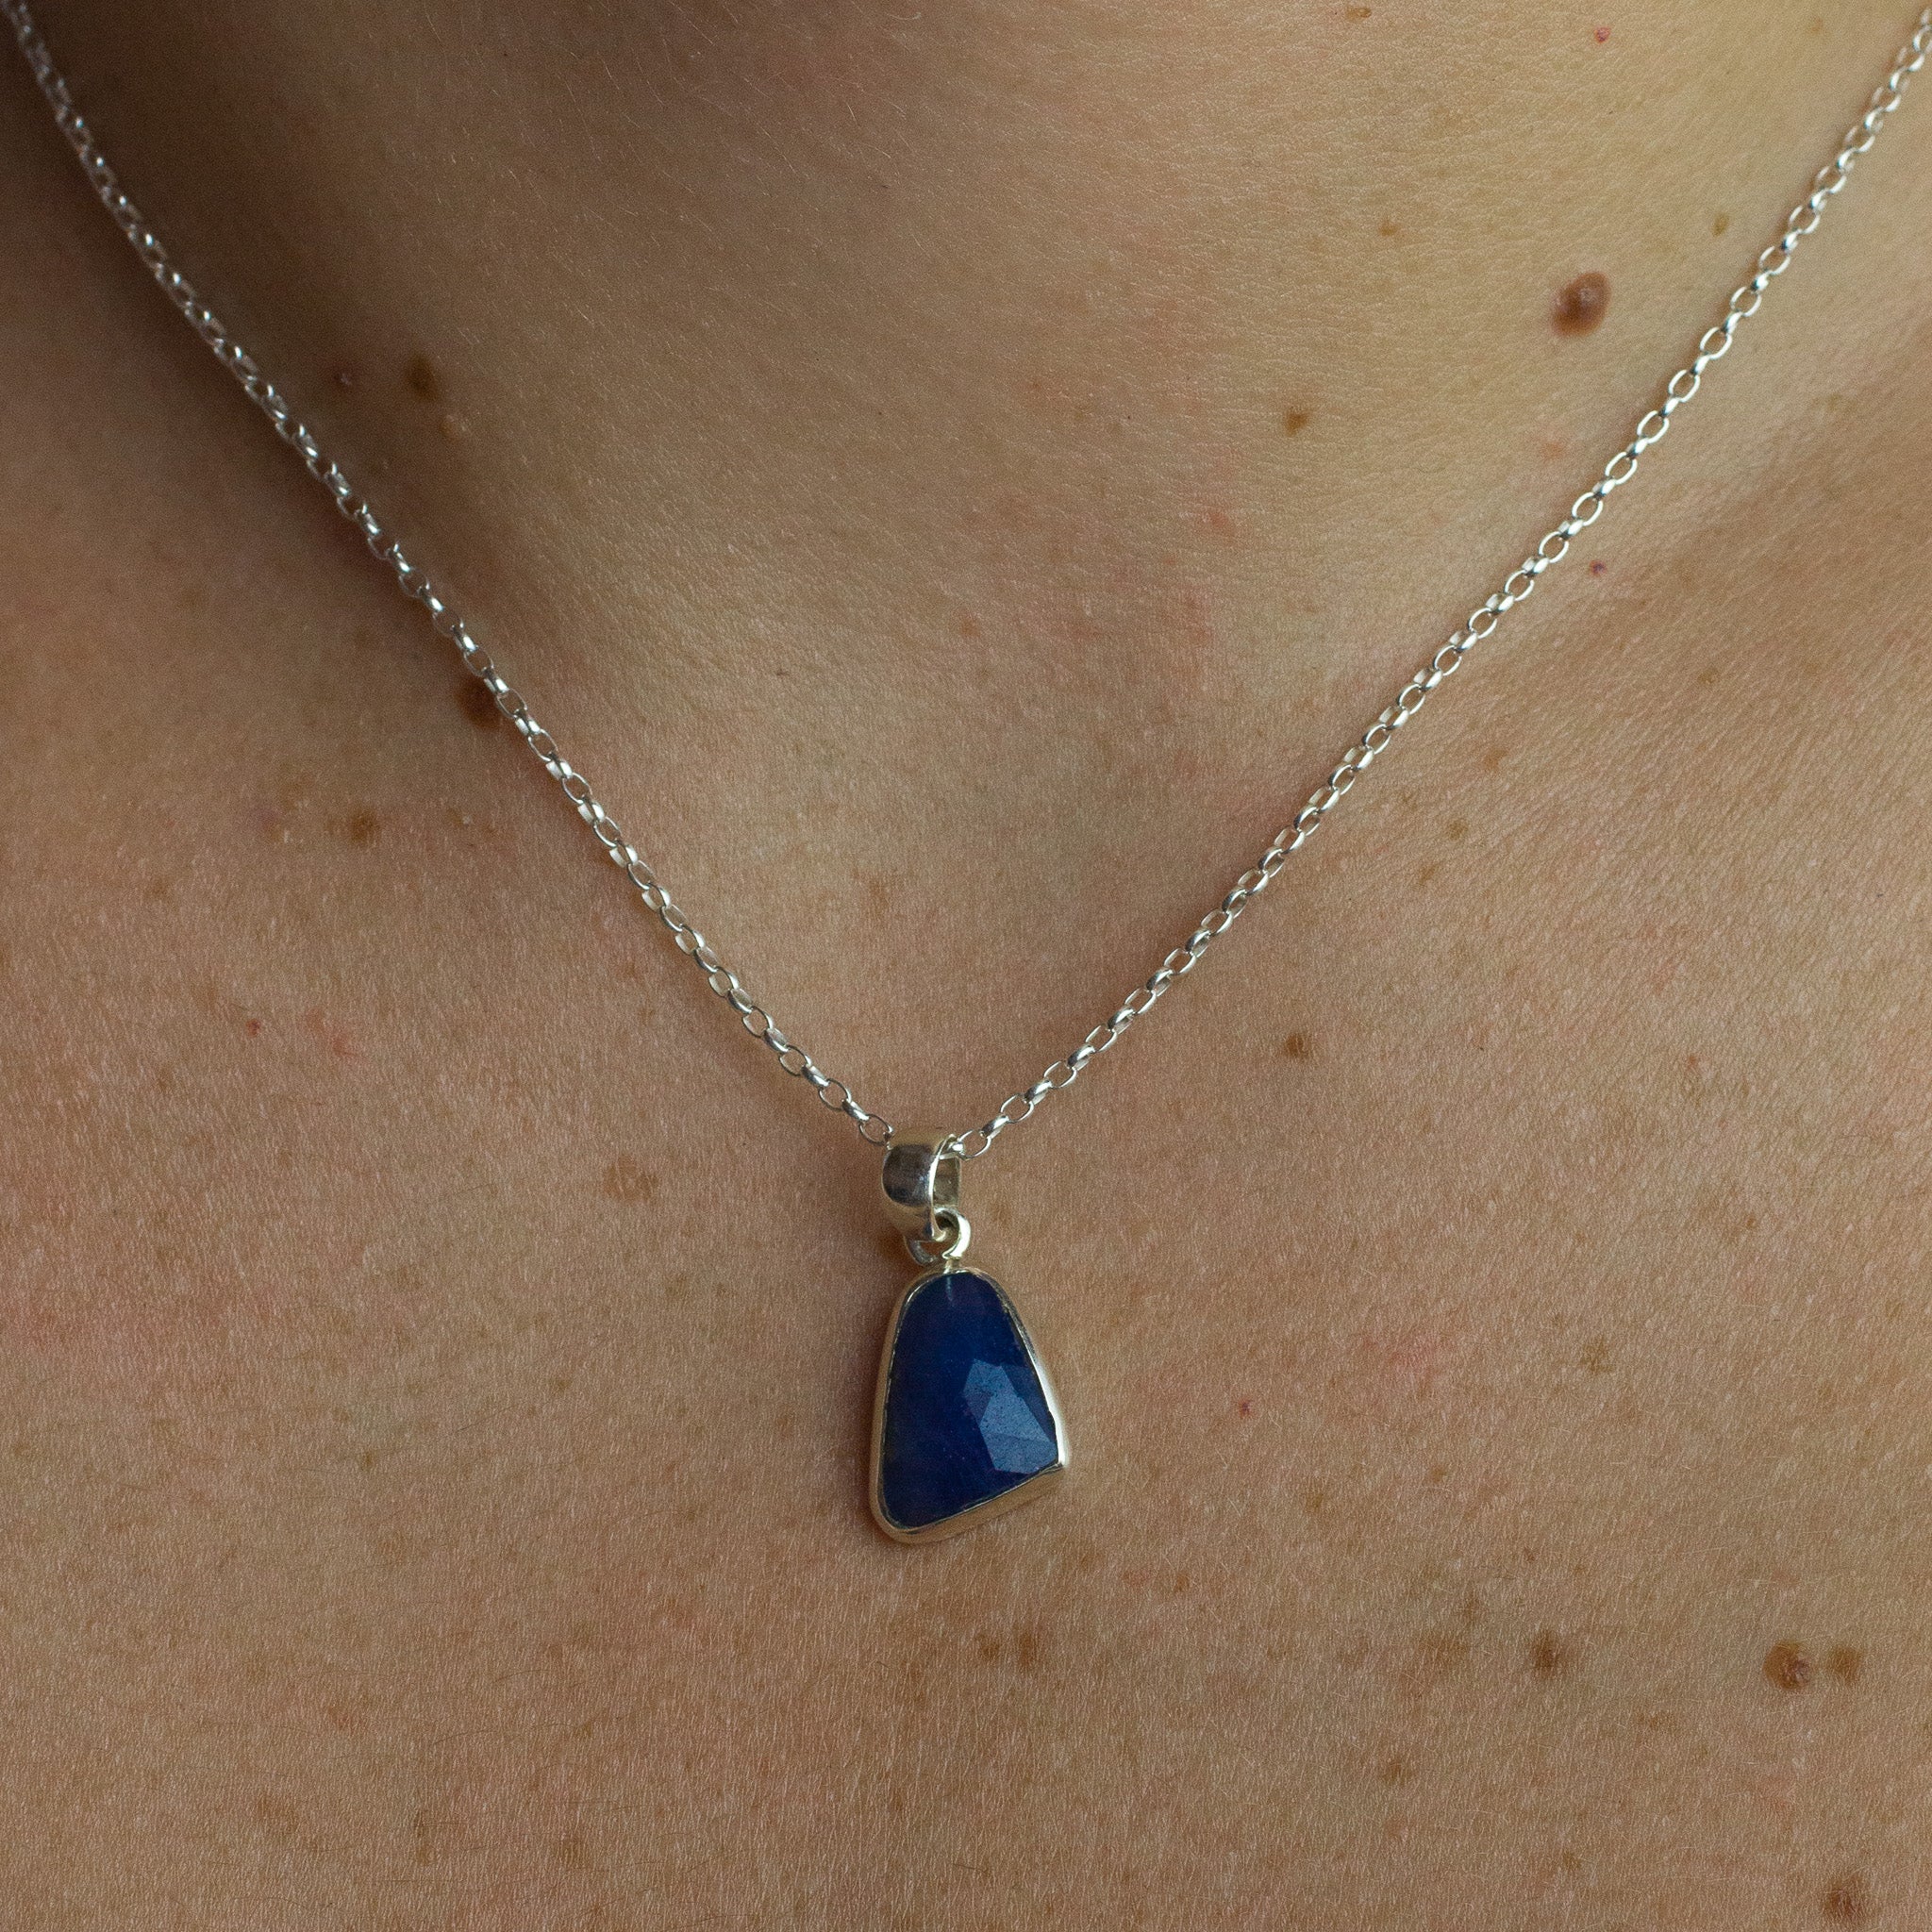 Borneo Sapphire Necklace with Hidden Gems - Gardens of the Sun | Ethical  Jewelry